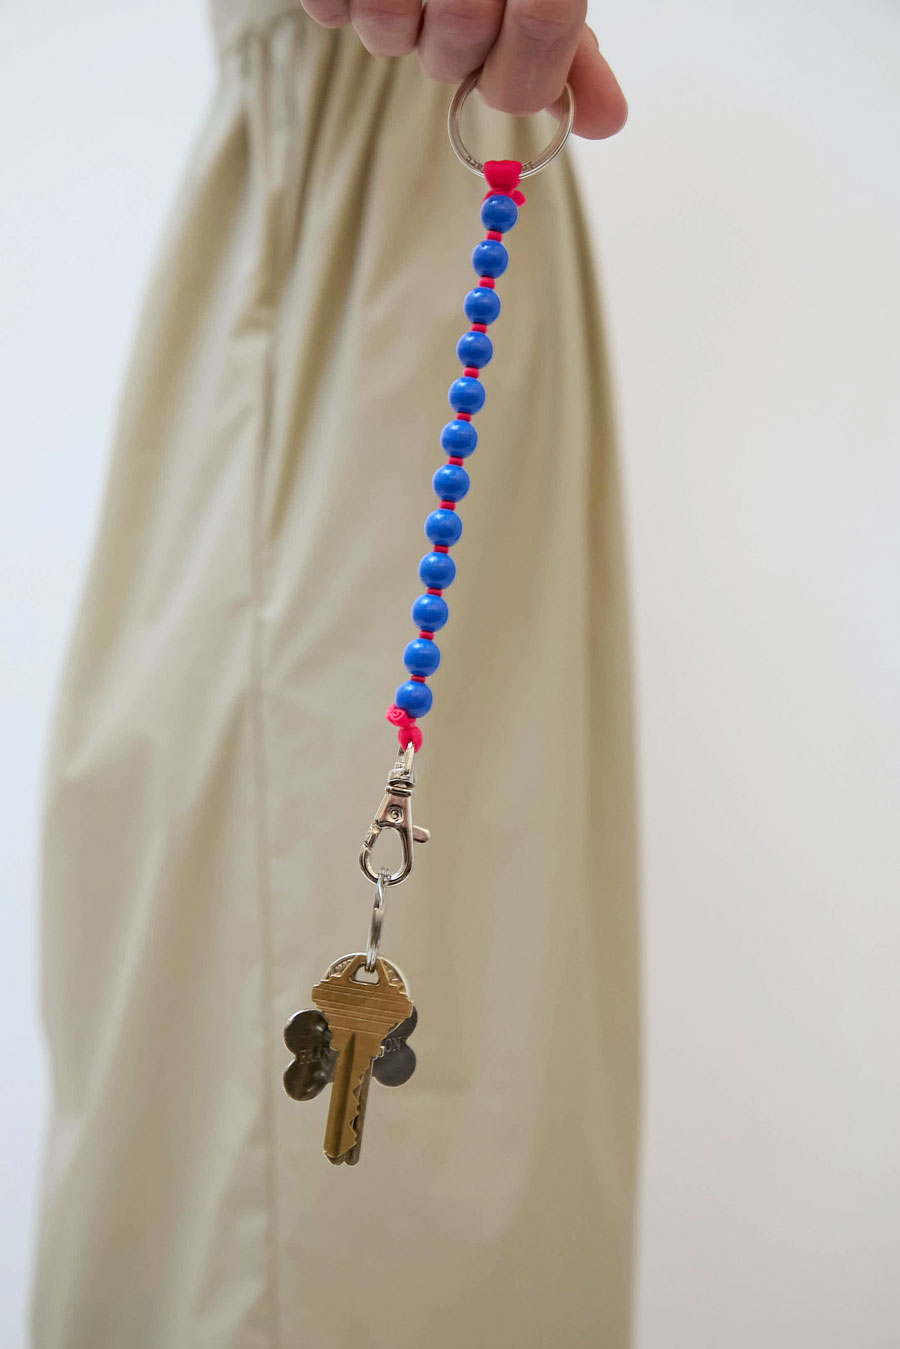 Ina Seifart Perlen Short Keyholder in Blue with Red Thread